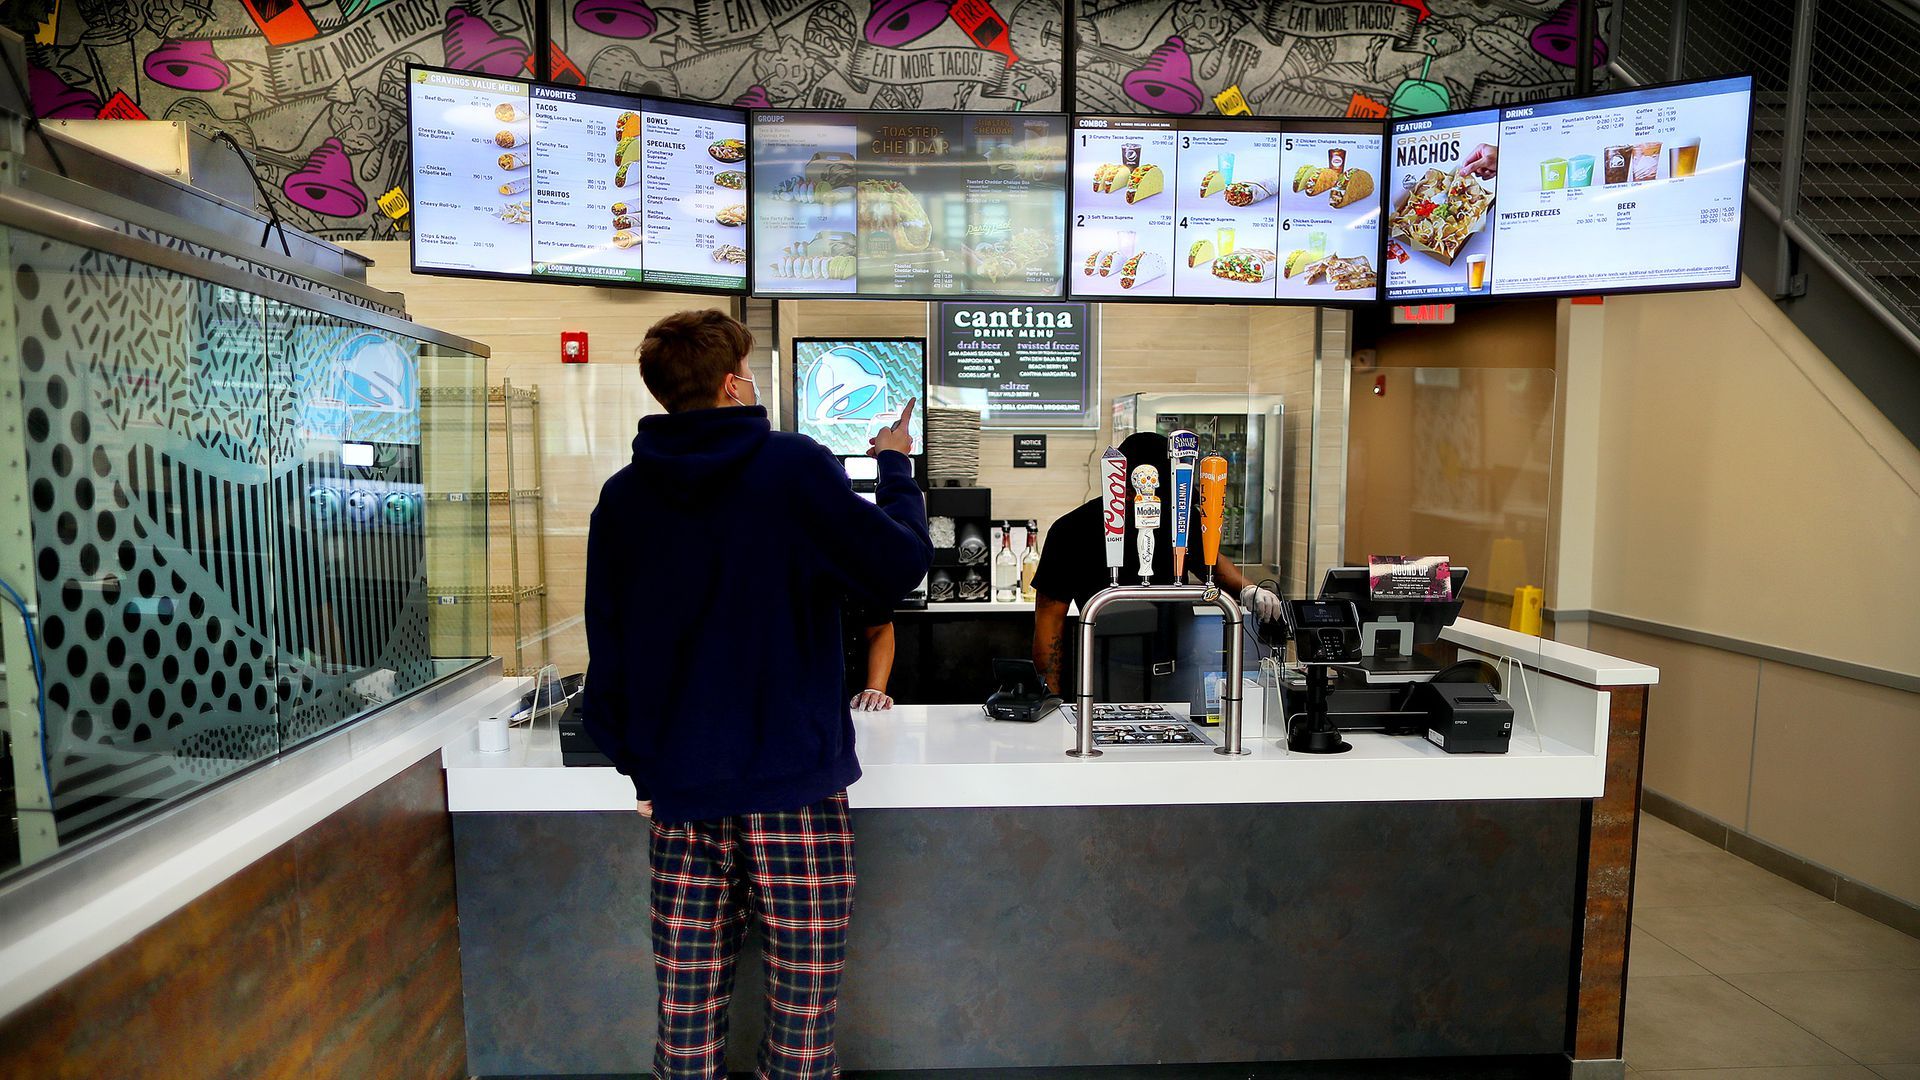 An employee takes an order at a Taco Bell Cantina in Brookline, Mass., on Dec. 4, 2020. Photo: John Tlumacki/The Boston Globe via Getty Images